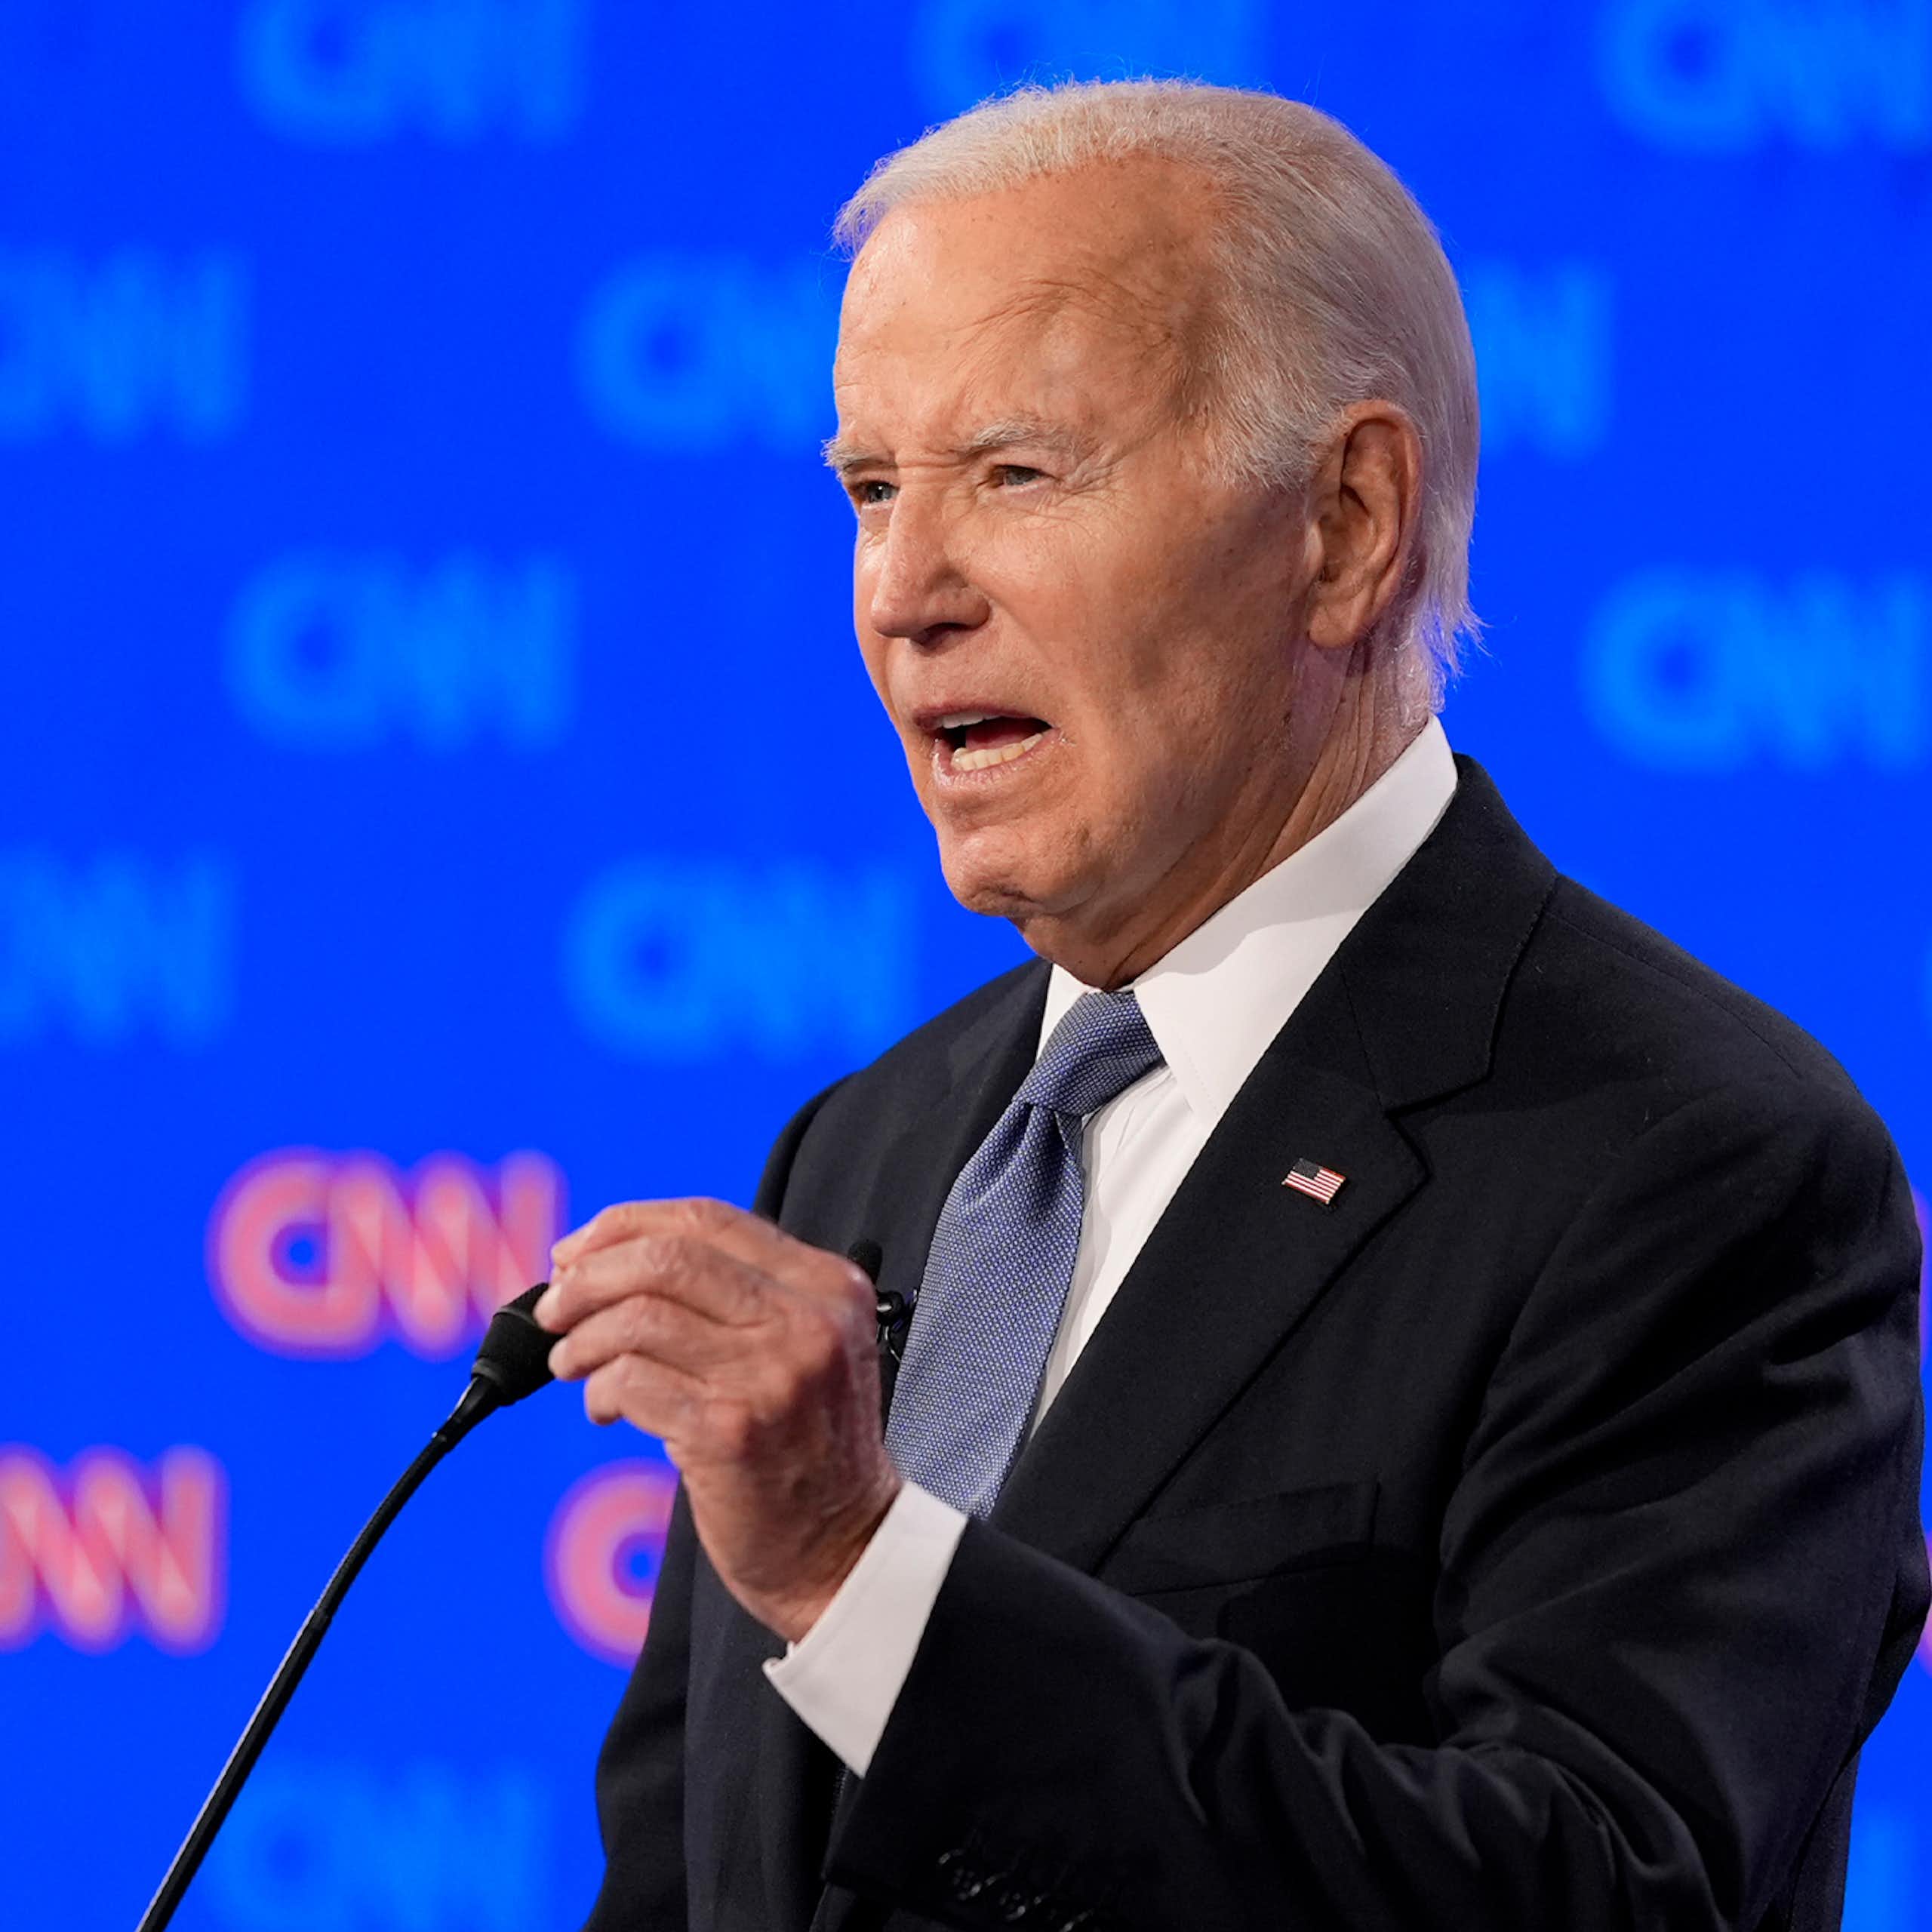 Muddled answers and outright lies: what the Biden-Trump debate says about the dire state of US politics